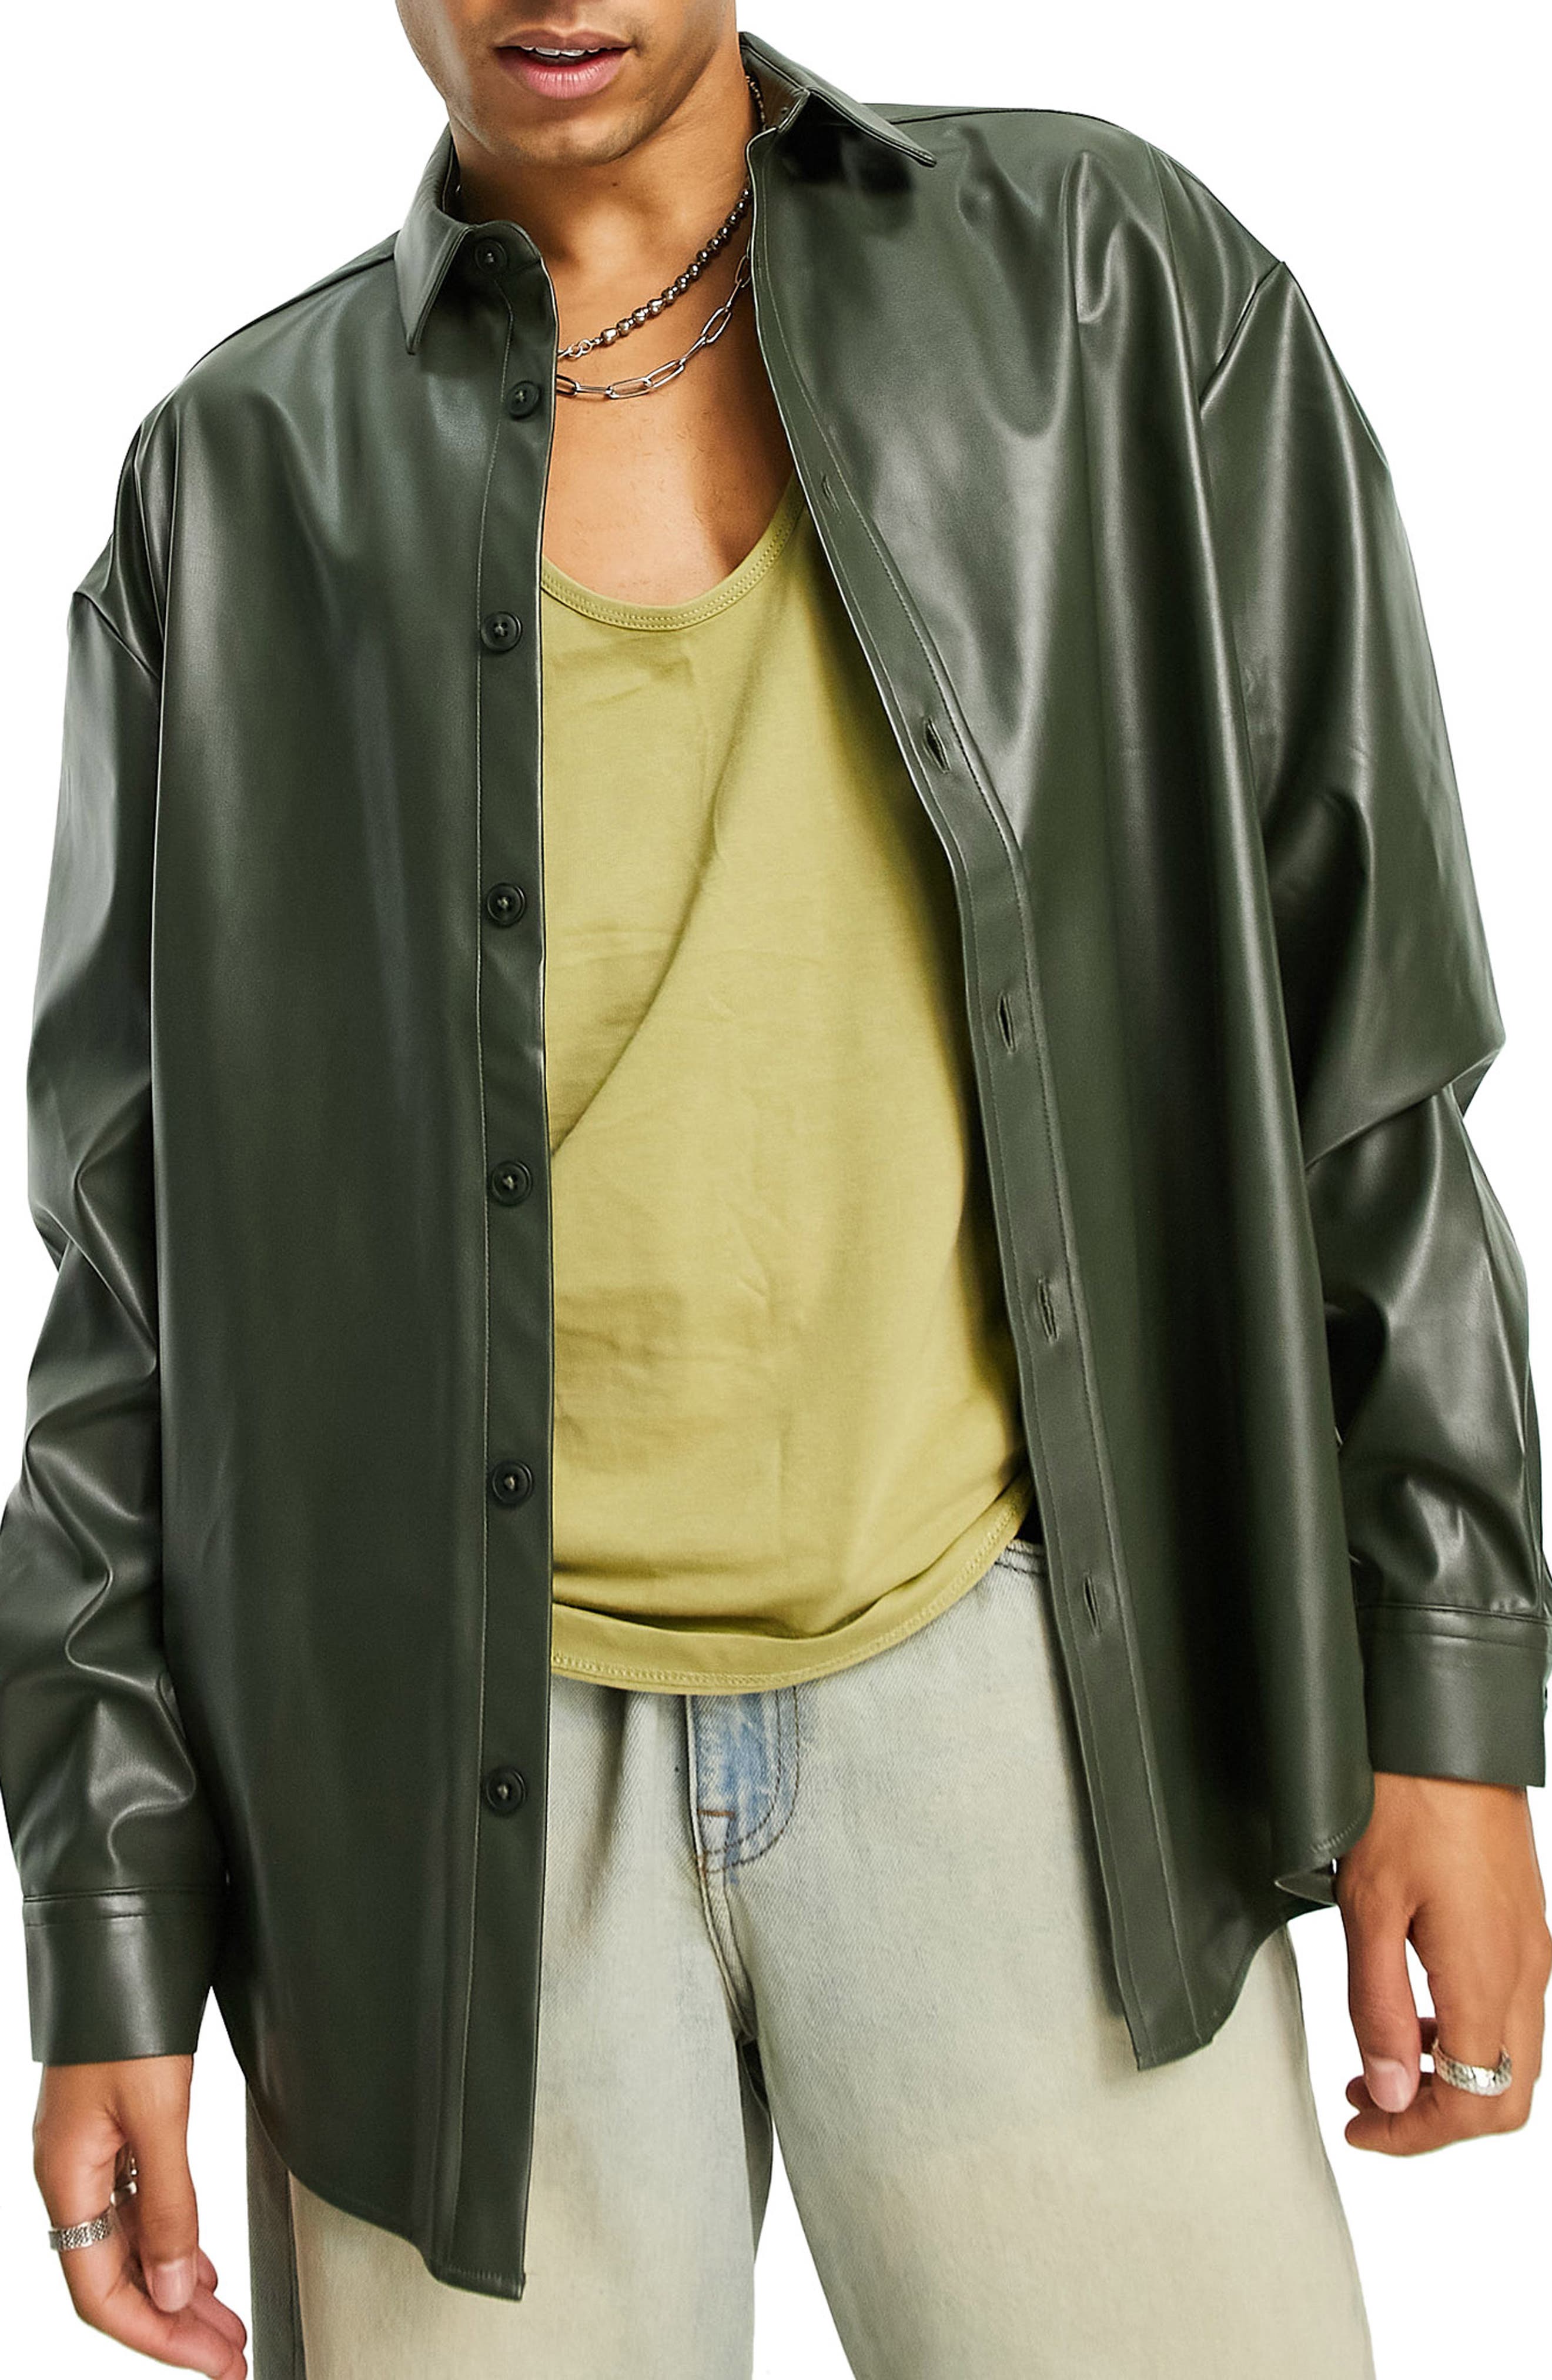 Tods Jacket With Leather Inserts in Green Womens Mens Clothing Mens Jackets Casual jackets 